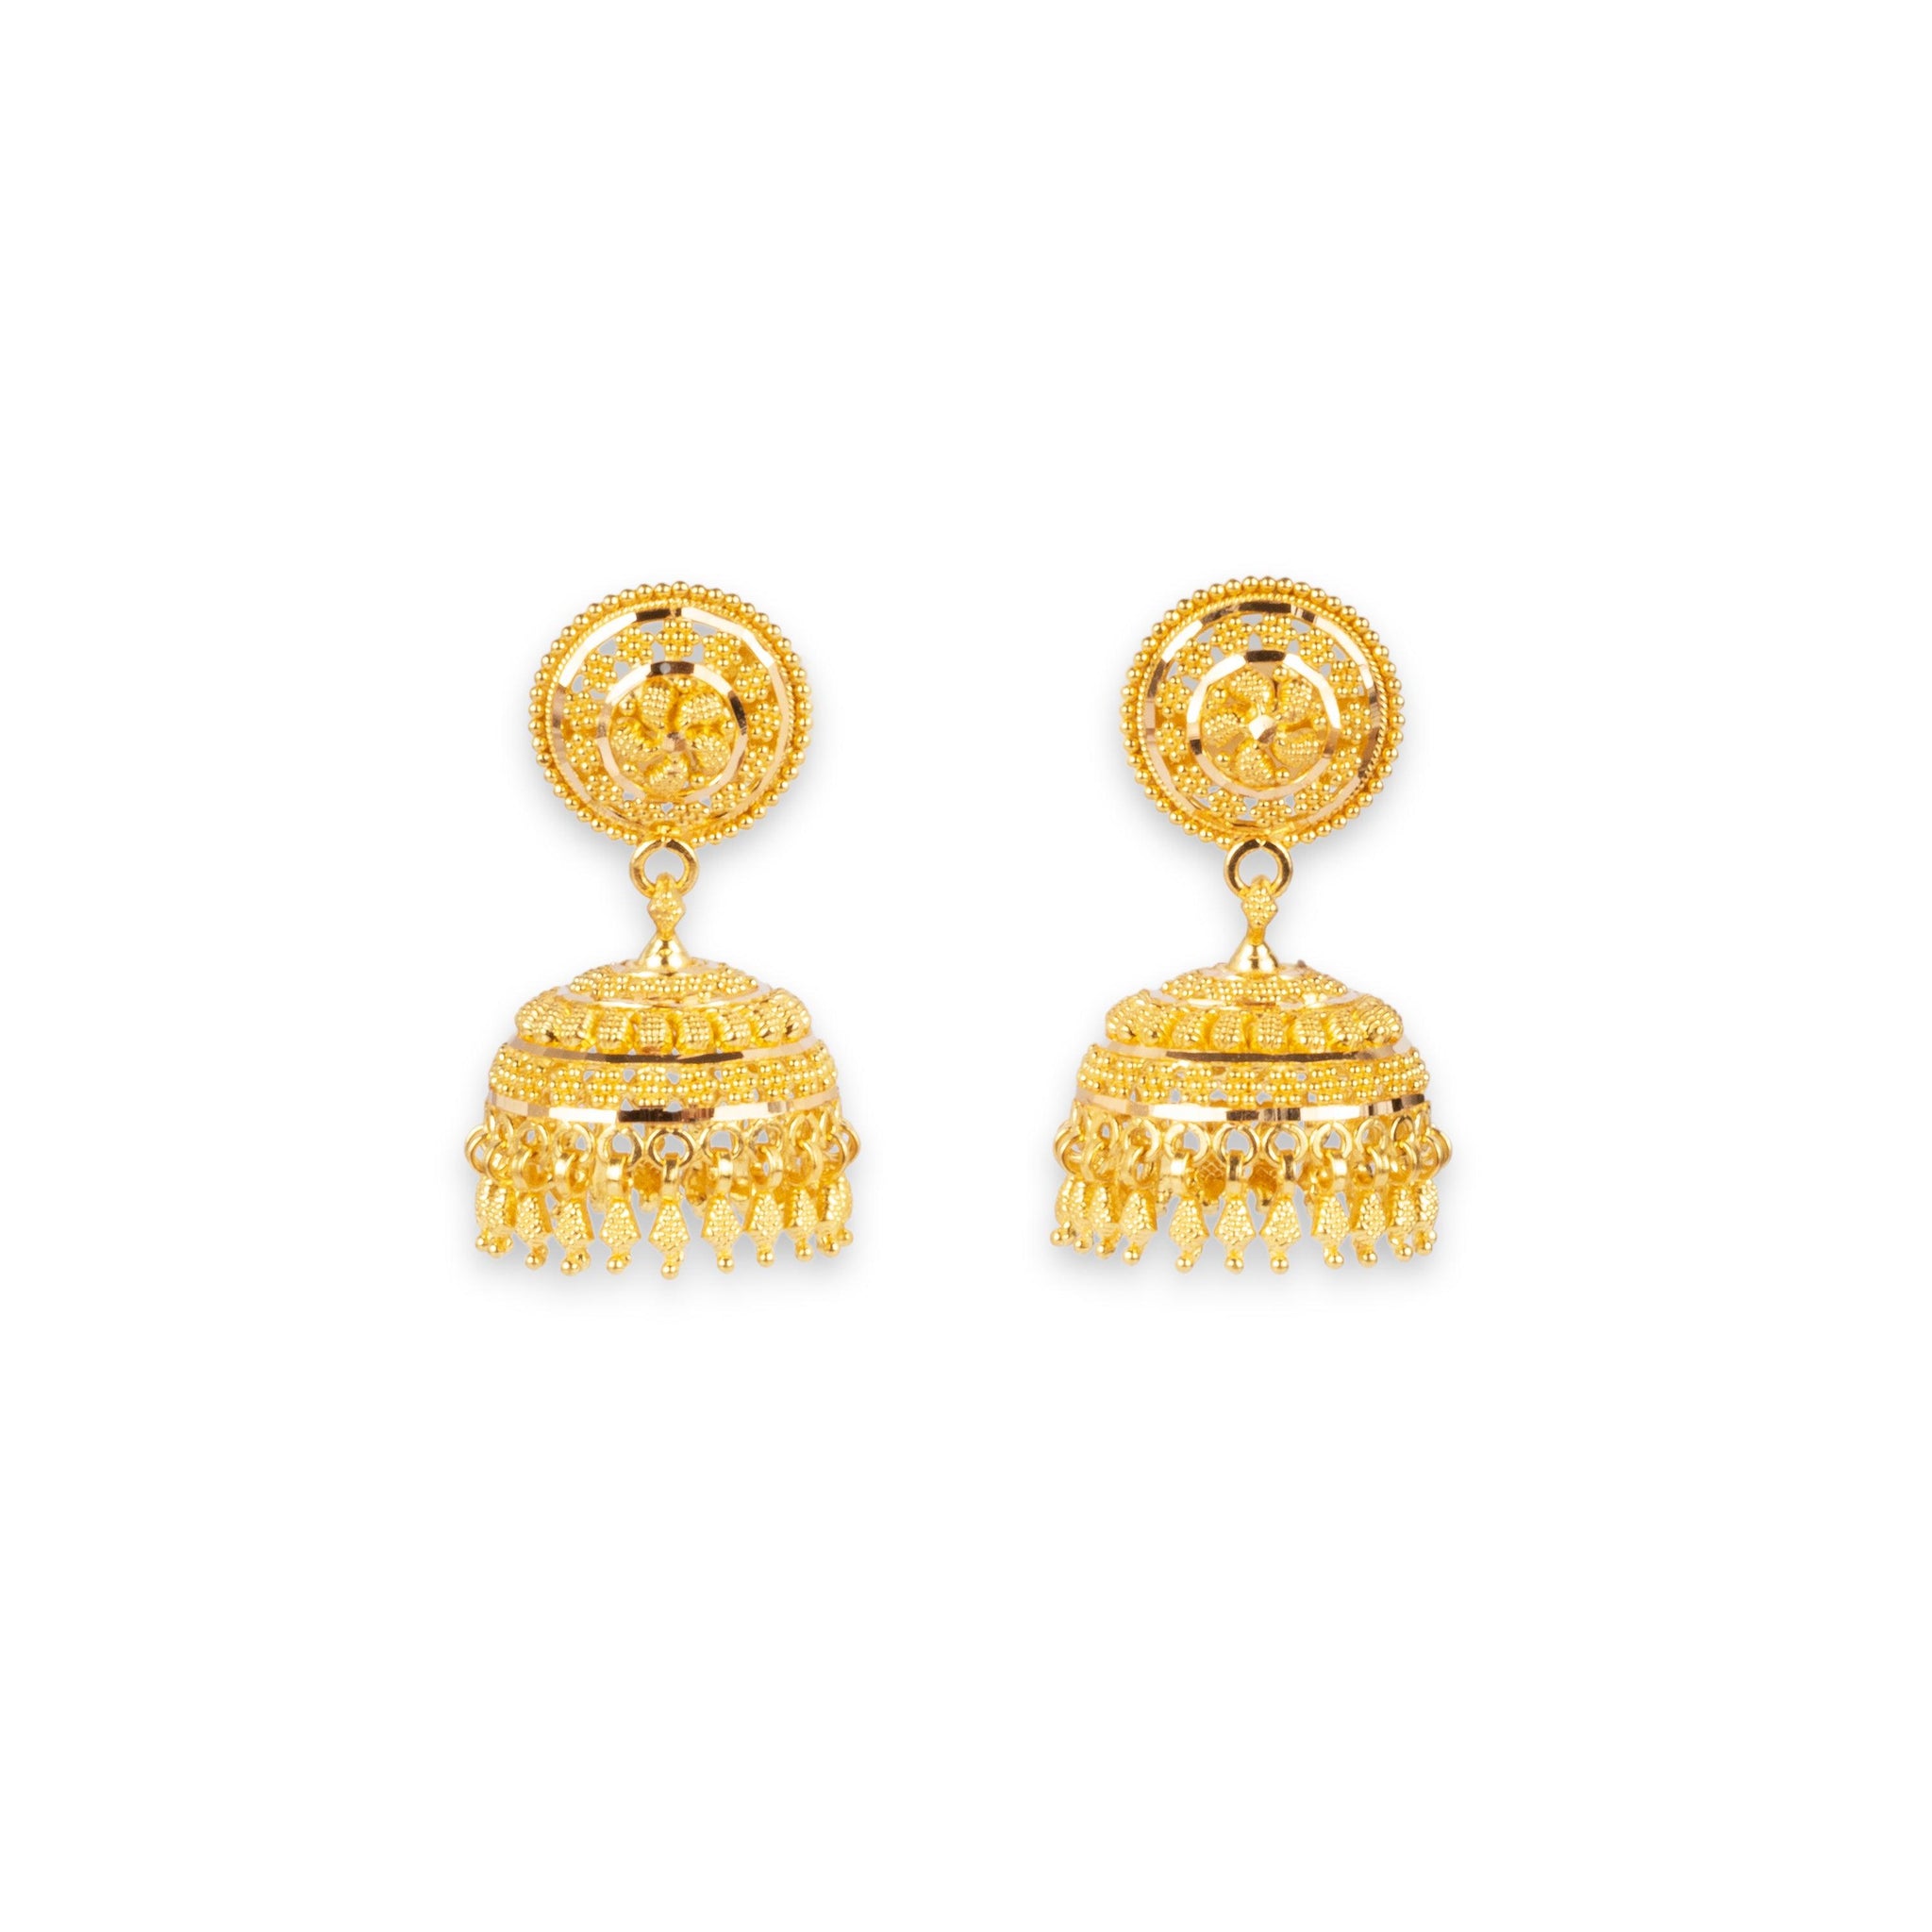 22ct Gold Jhoomka style Earrings with Filigree Work Design E-7929